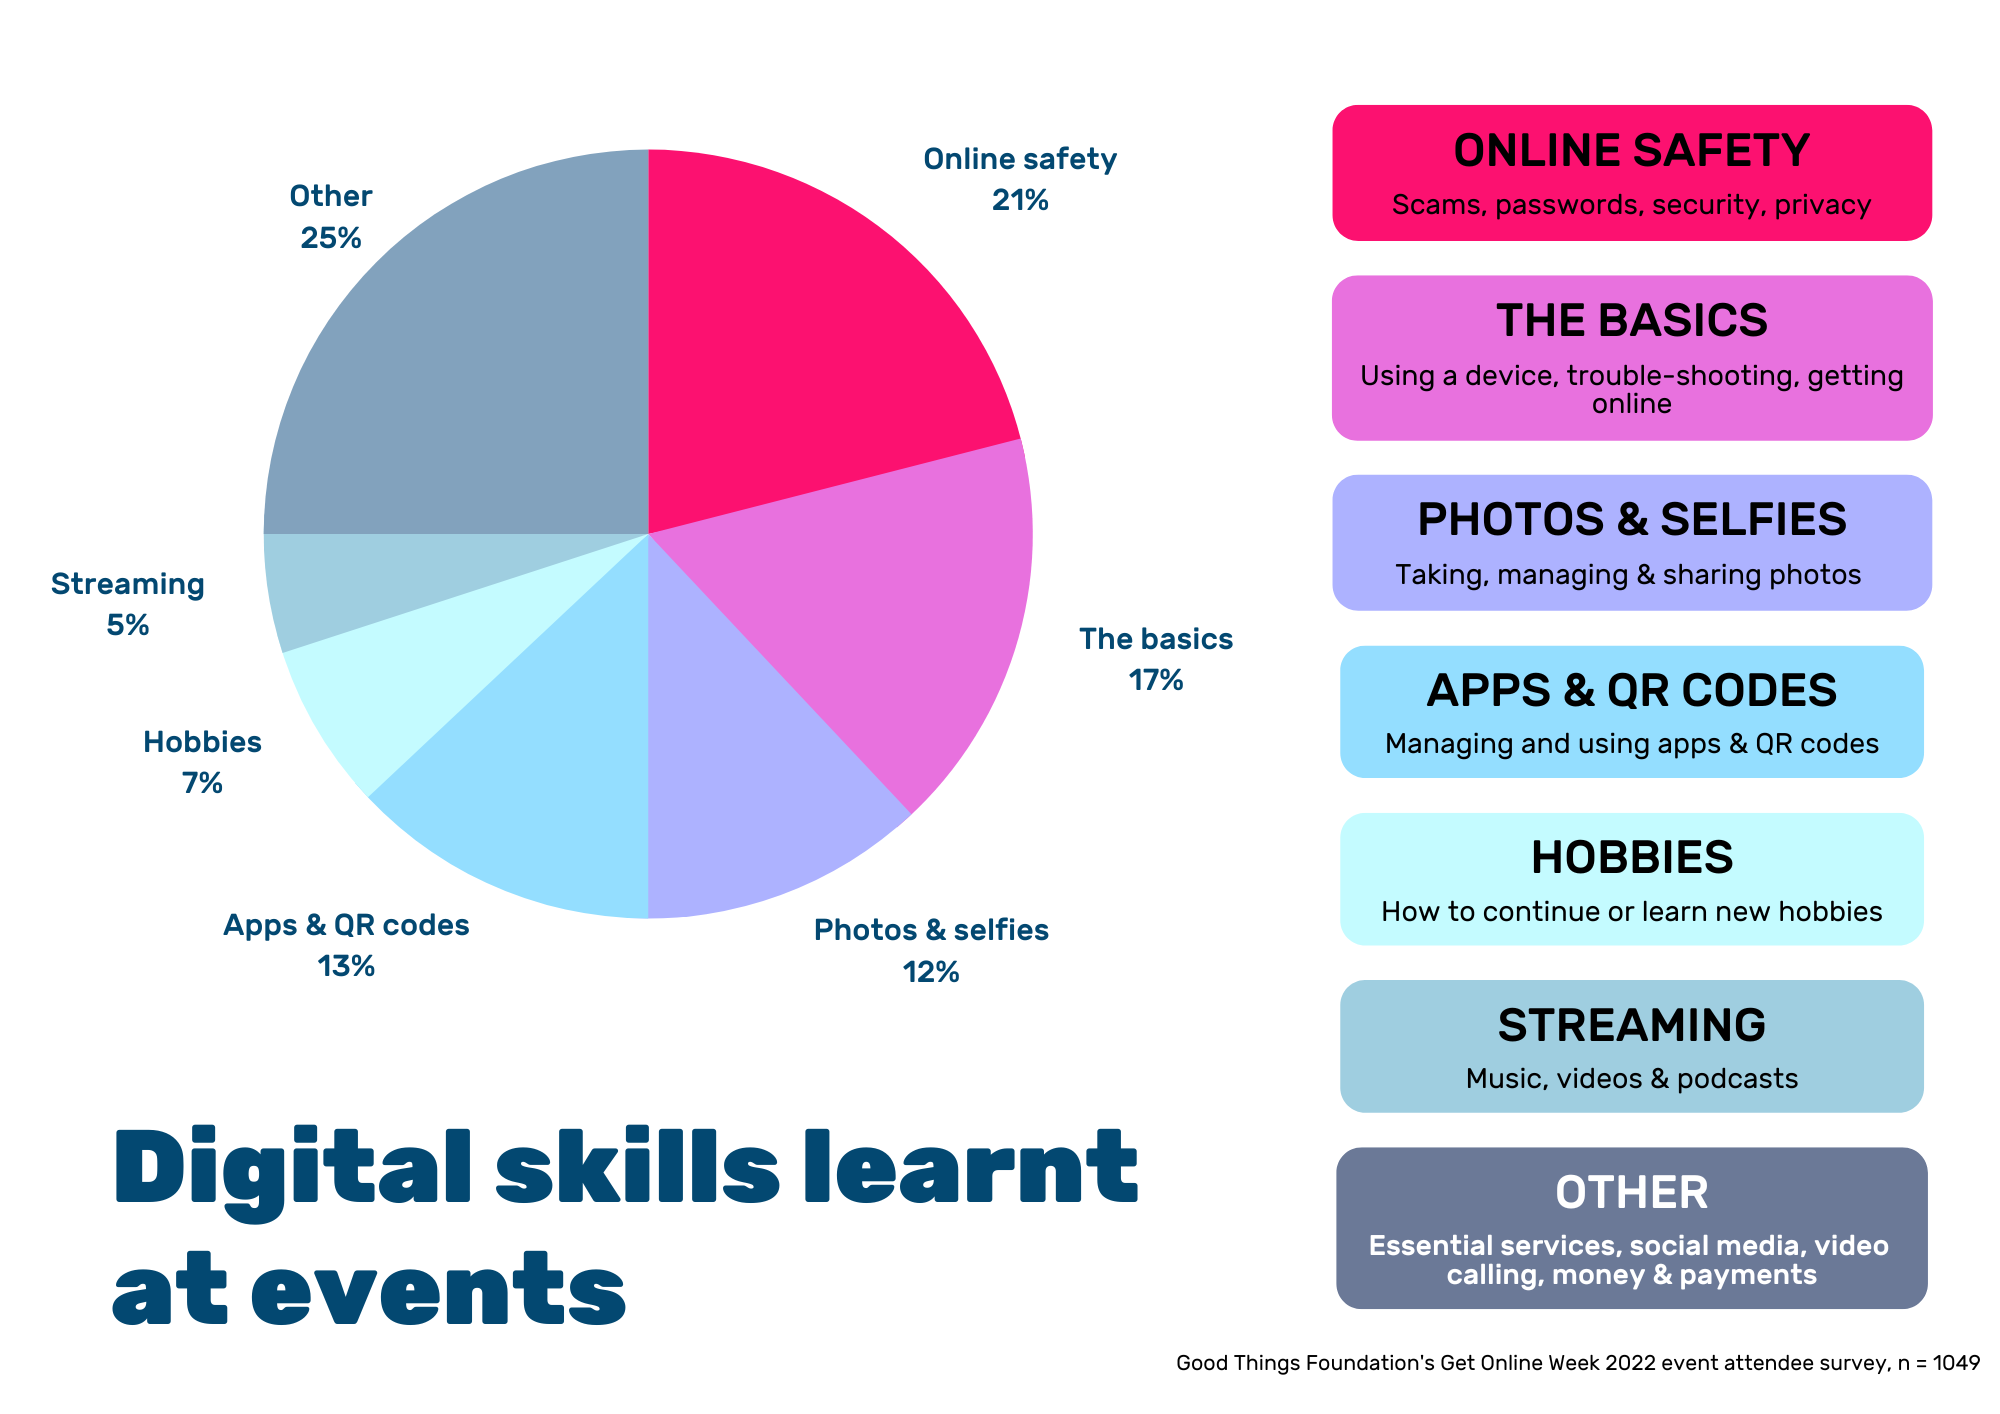 Digital skills learnt at Get Online Week events - pie chart of percentage of people who learnt different digital skills during Get Online Week